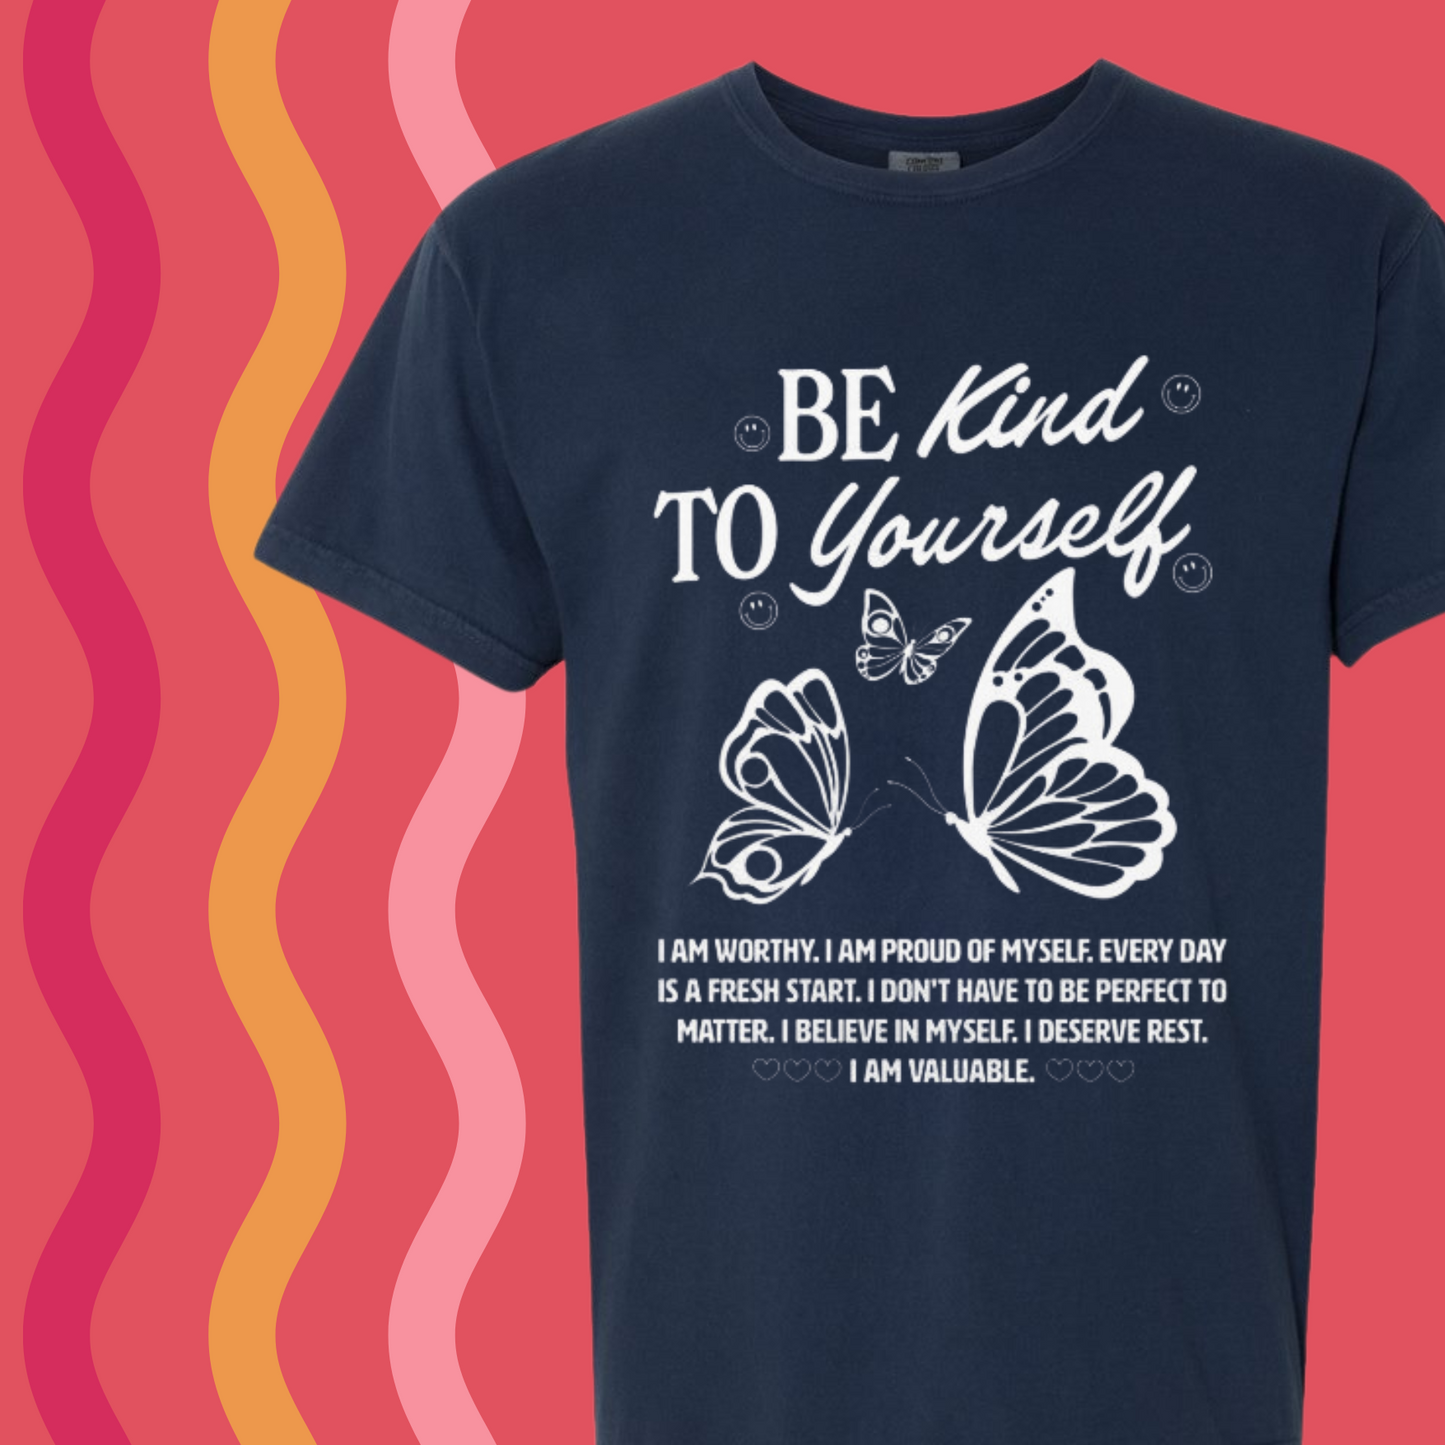 BE KIND TO YOURSELF TEE